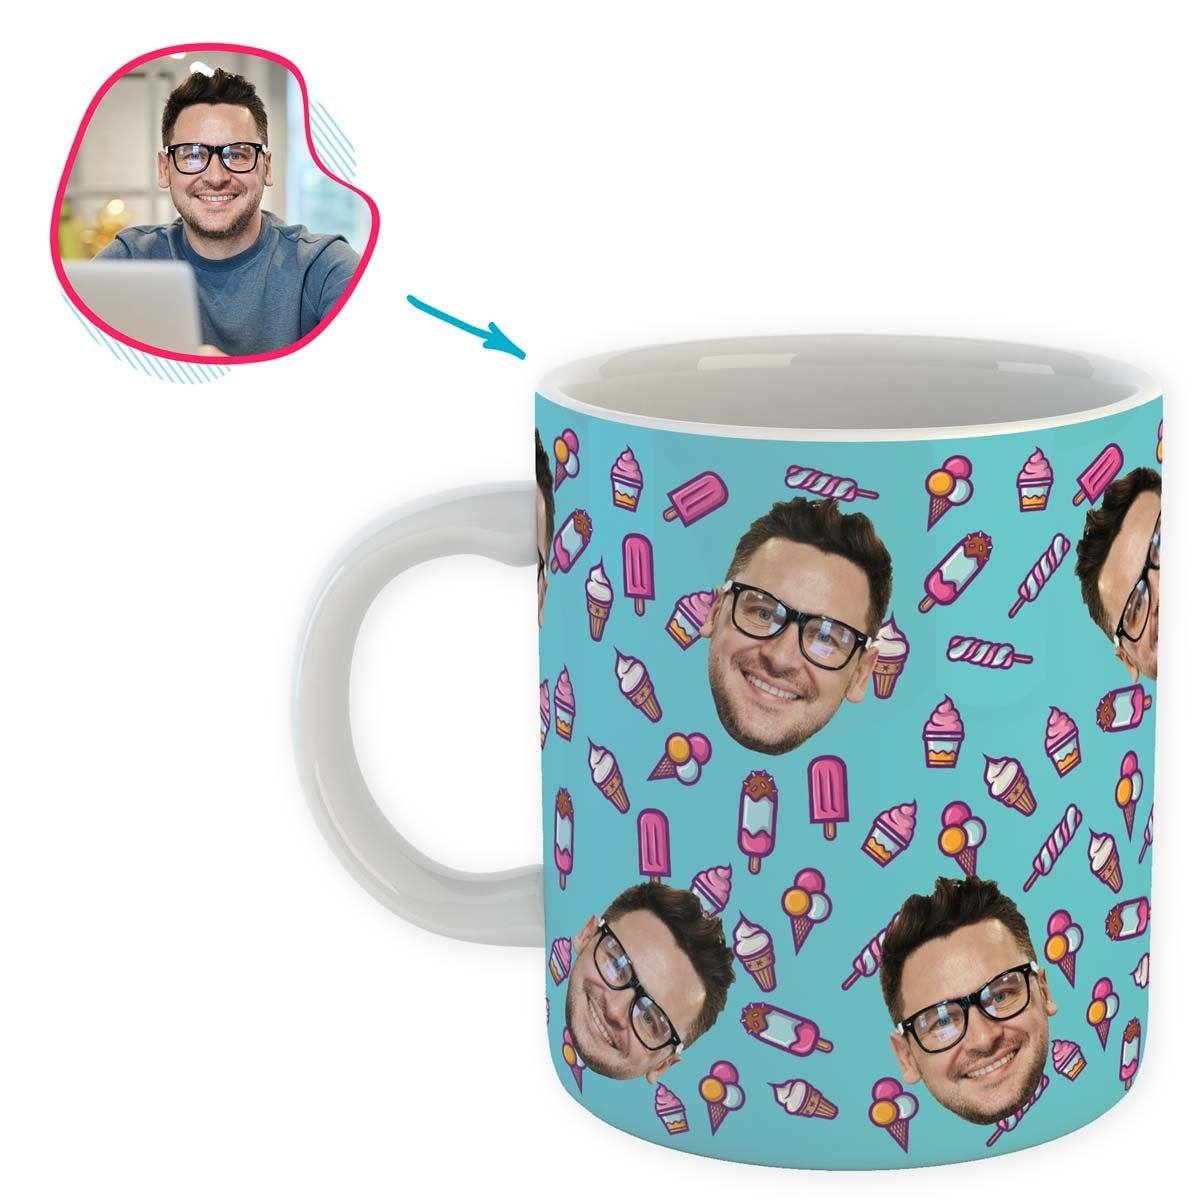 blue Candies mug personalized with photo of face printed on it